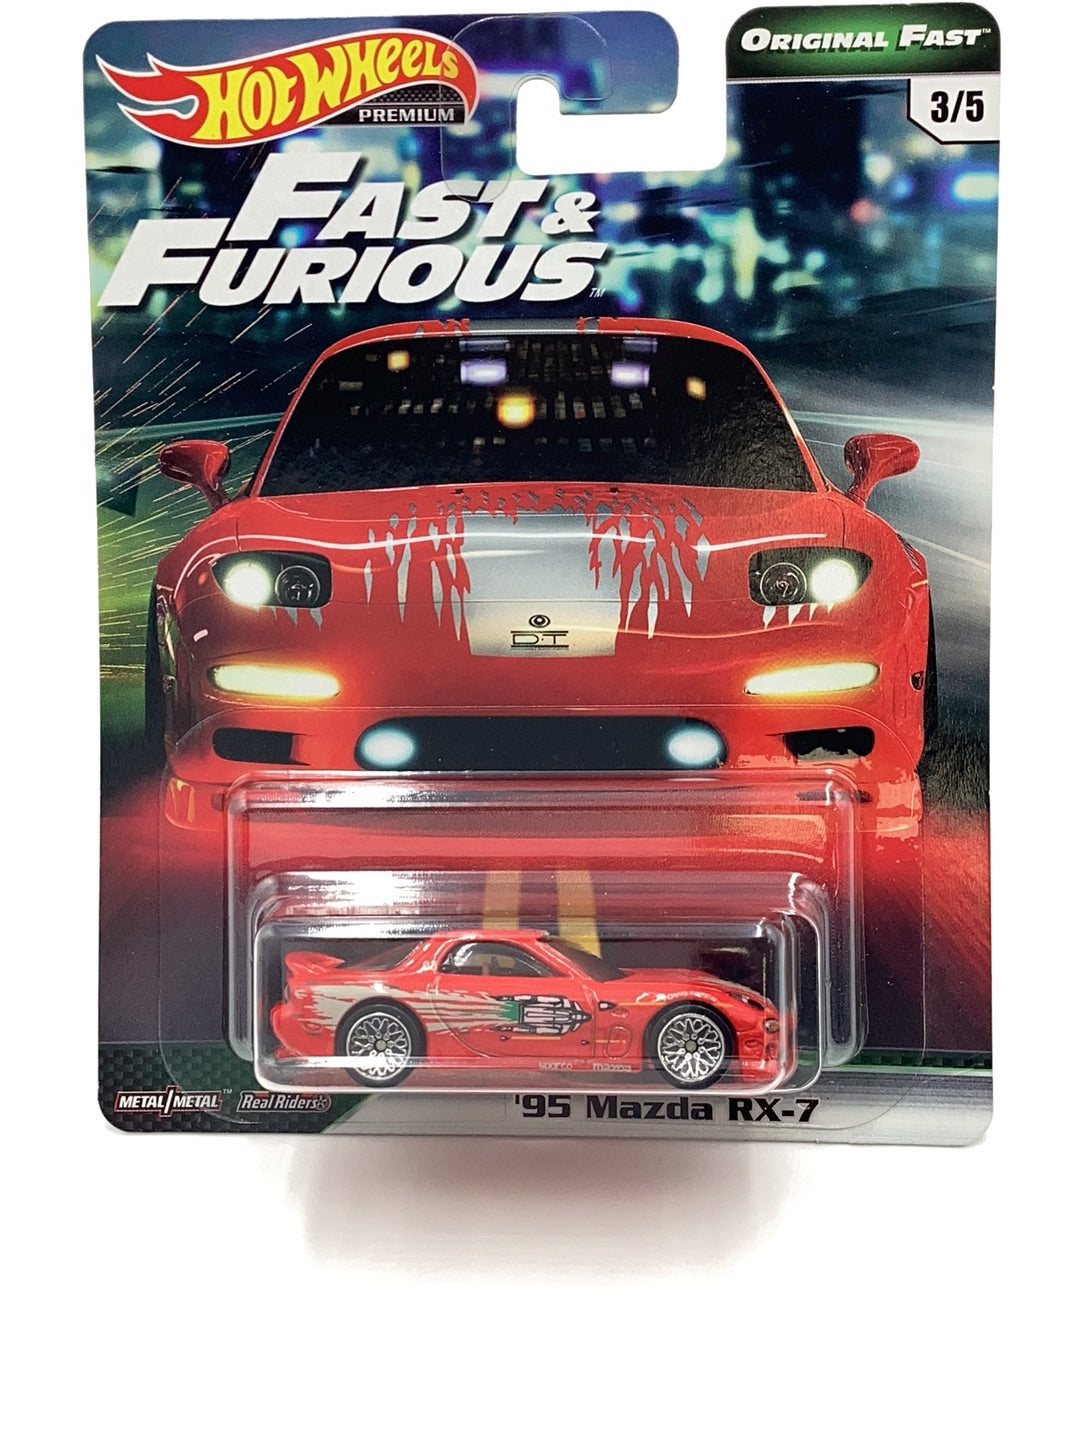 Hot wheels premium fast and furious Original Fast 3/5 95 Mazda RX-7 with protector